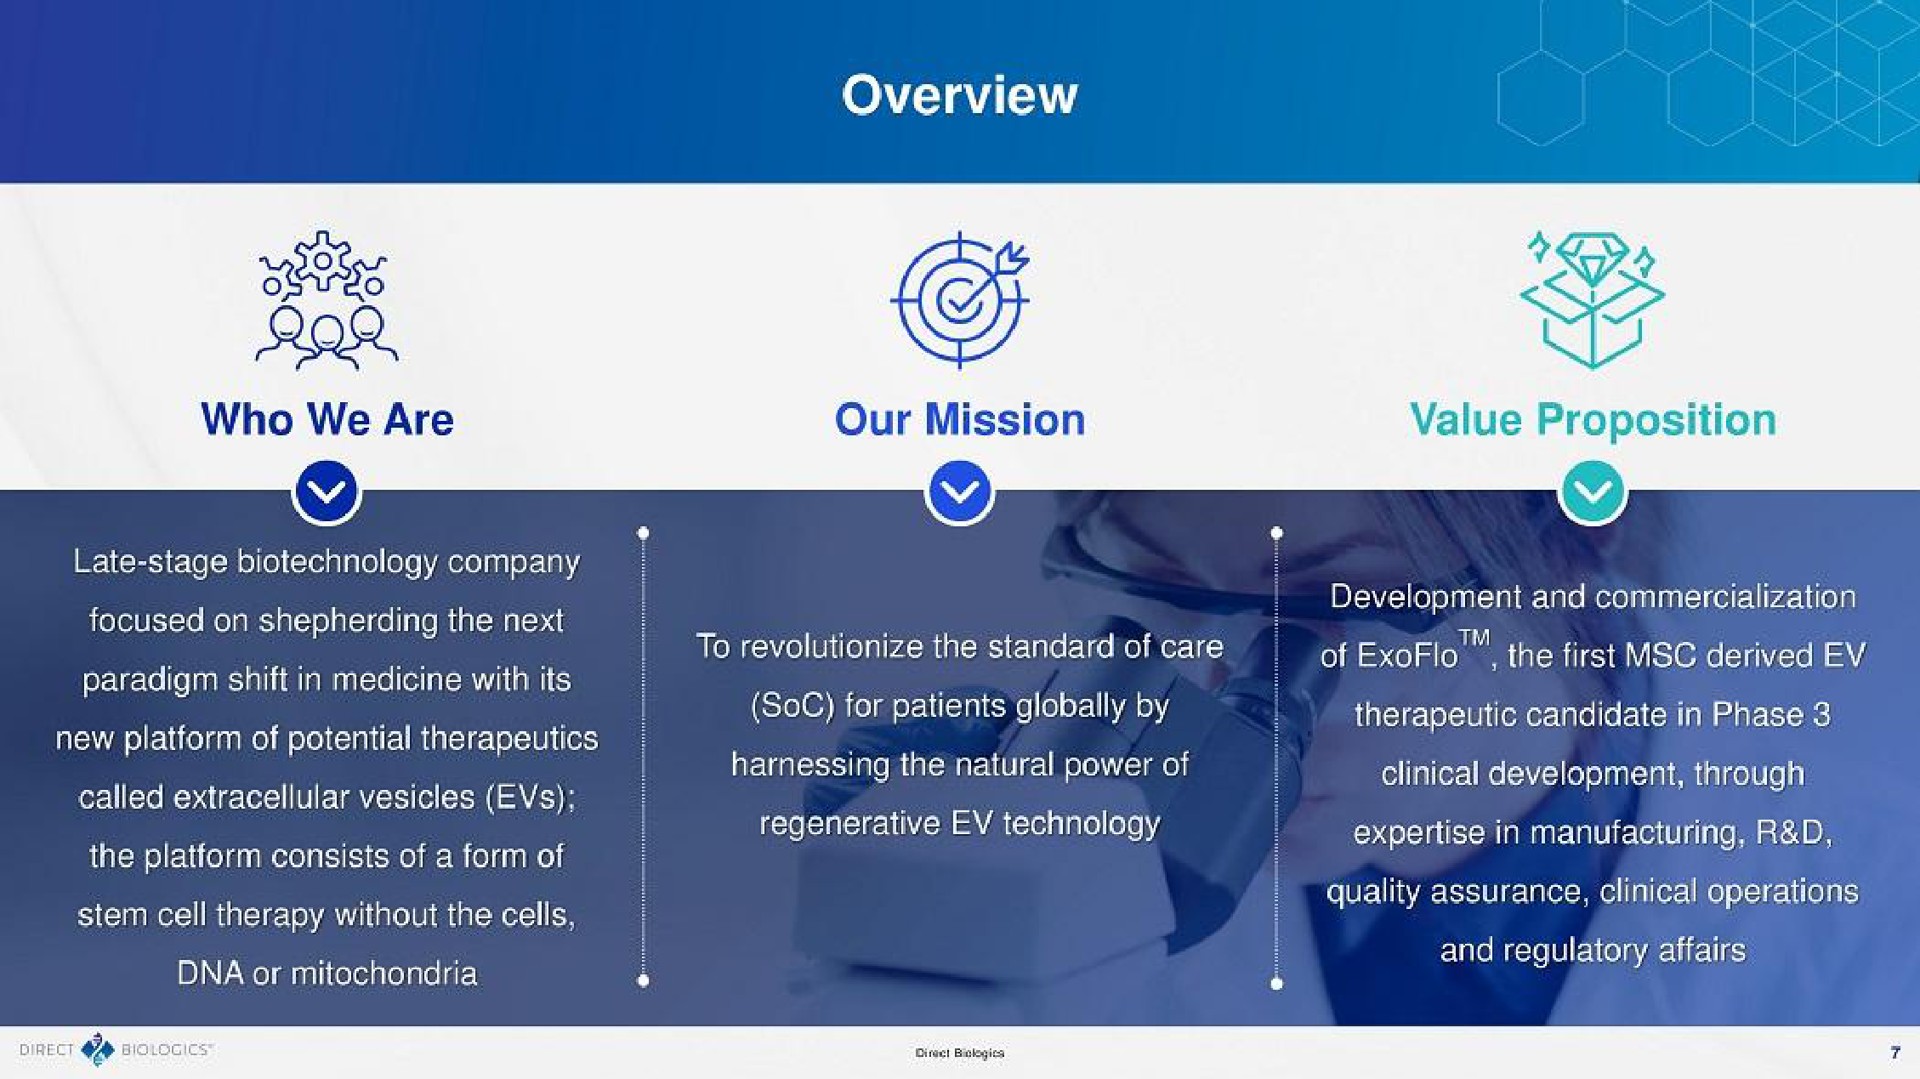 overview sis value proposition who we are our mission soc for patients globally by regenerative technology therapeutic candidate in phase in manufacturing | Direct Biologics